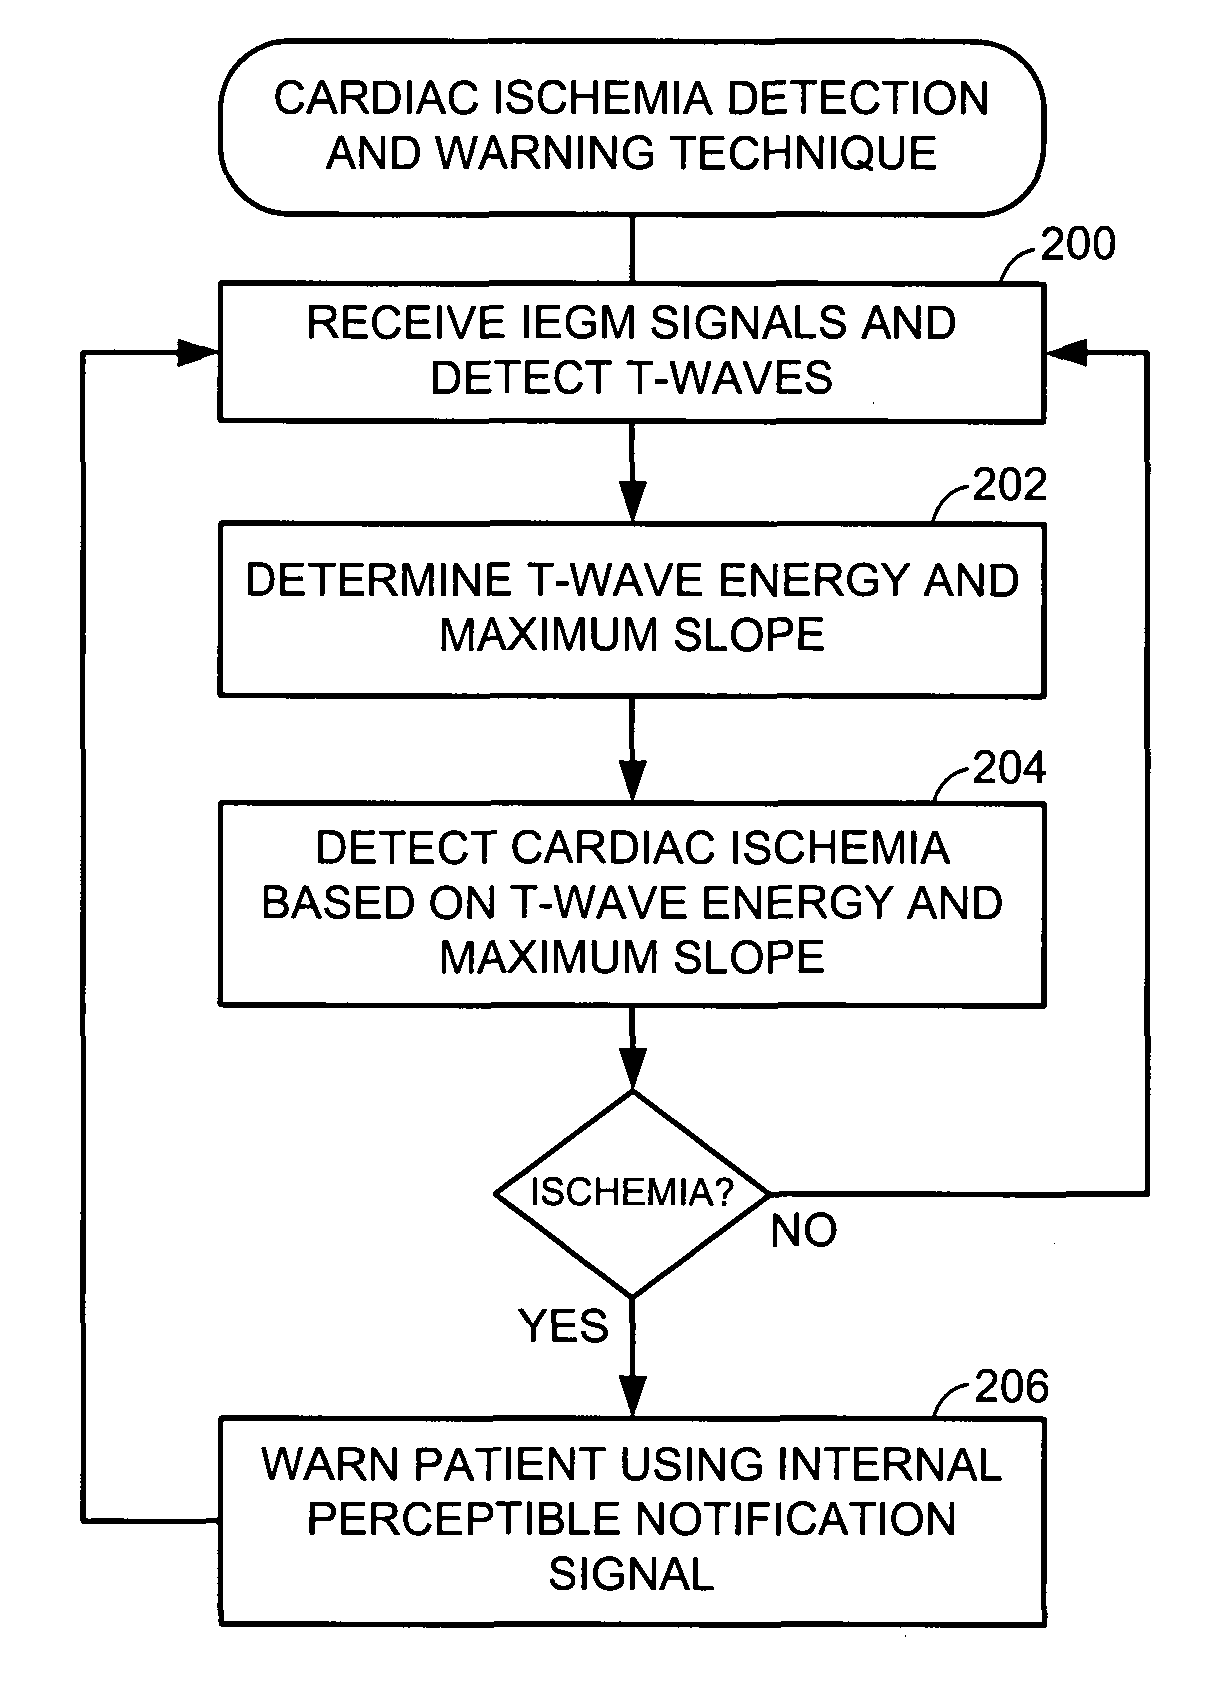 System and method for detecting cardiac ischemia based on T-waves using an implantable medical device